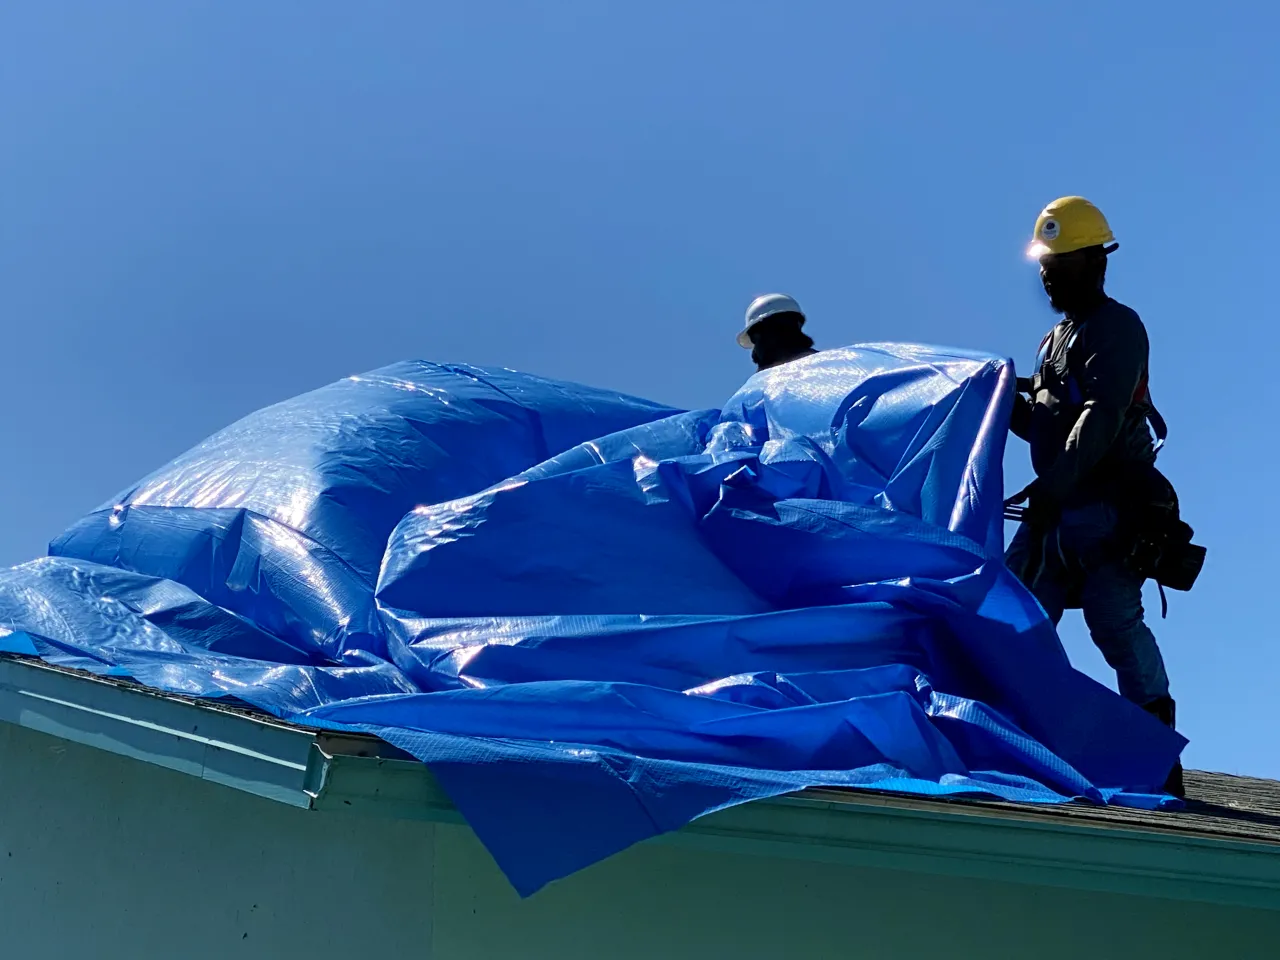 Image: Crews Work to Install Tarps as Part of the Army Corps of Engineers Operation Blue Roof (2)